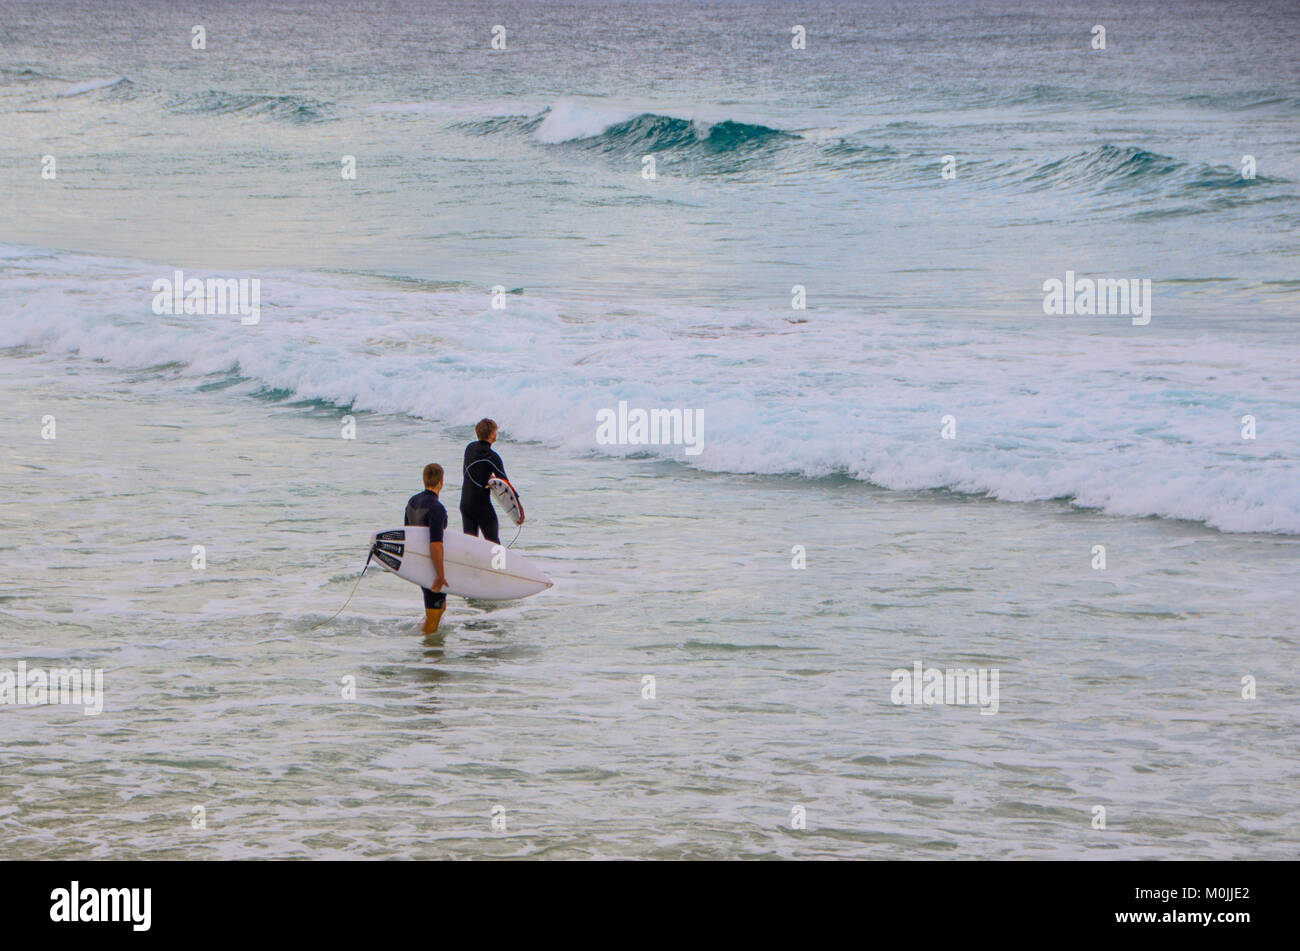 Two surfer walk out into the water - at Kirra Beach, Queensland, Australia Stock Photo